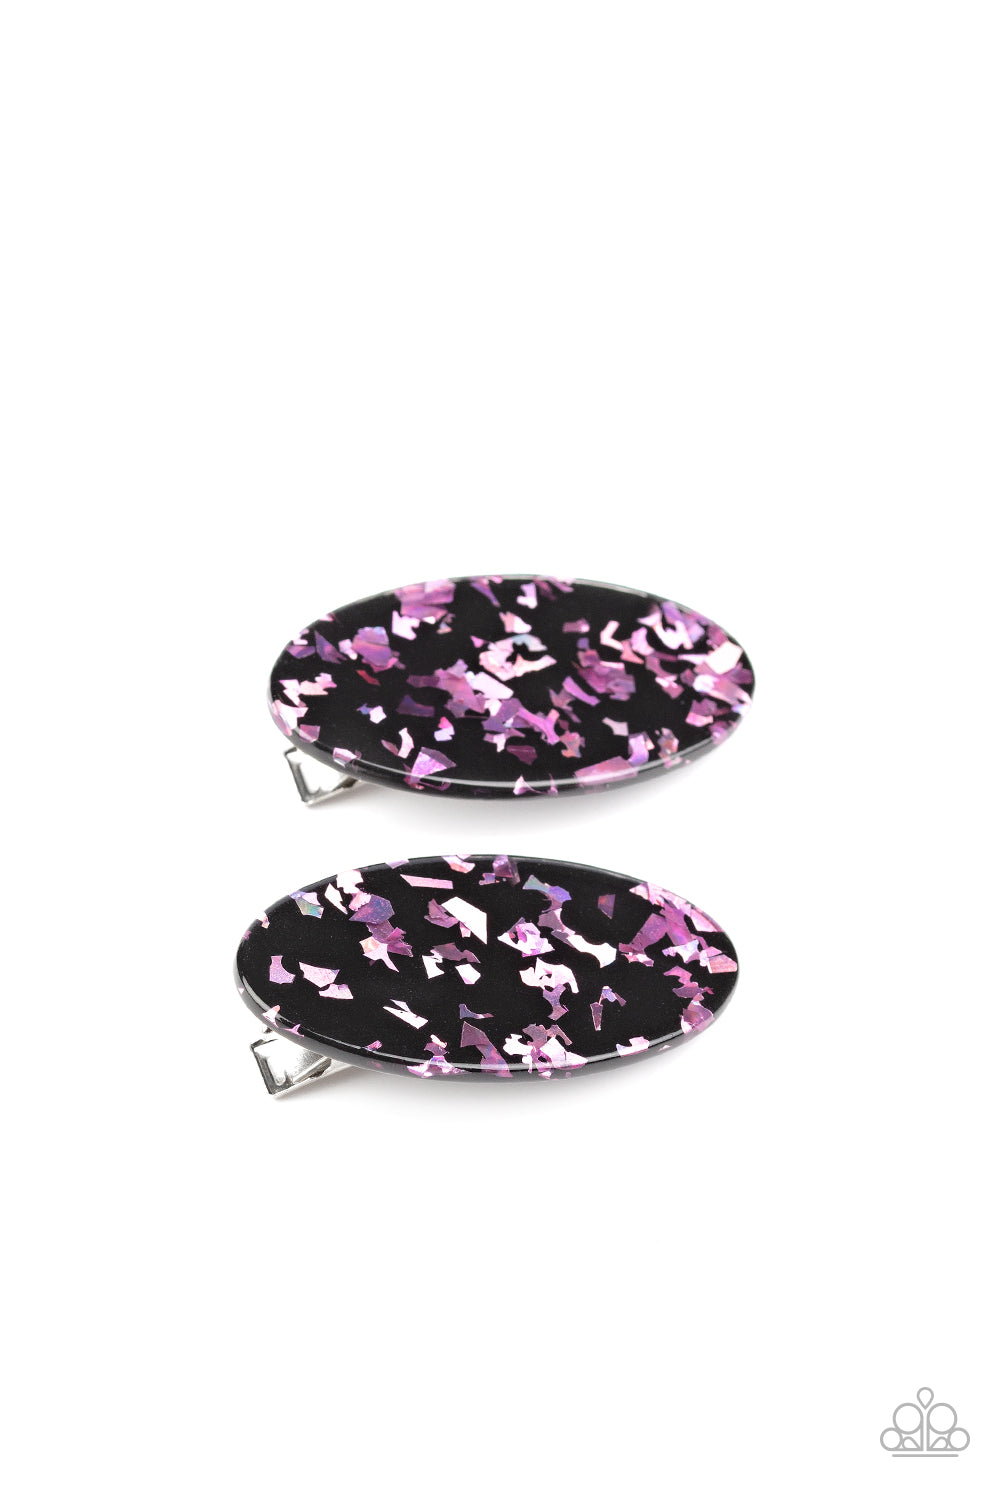 Get OVAL Yourself!- Pink Hair Clip